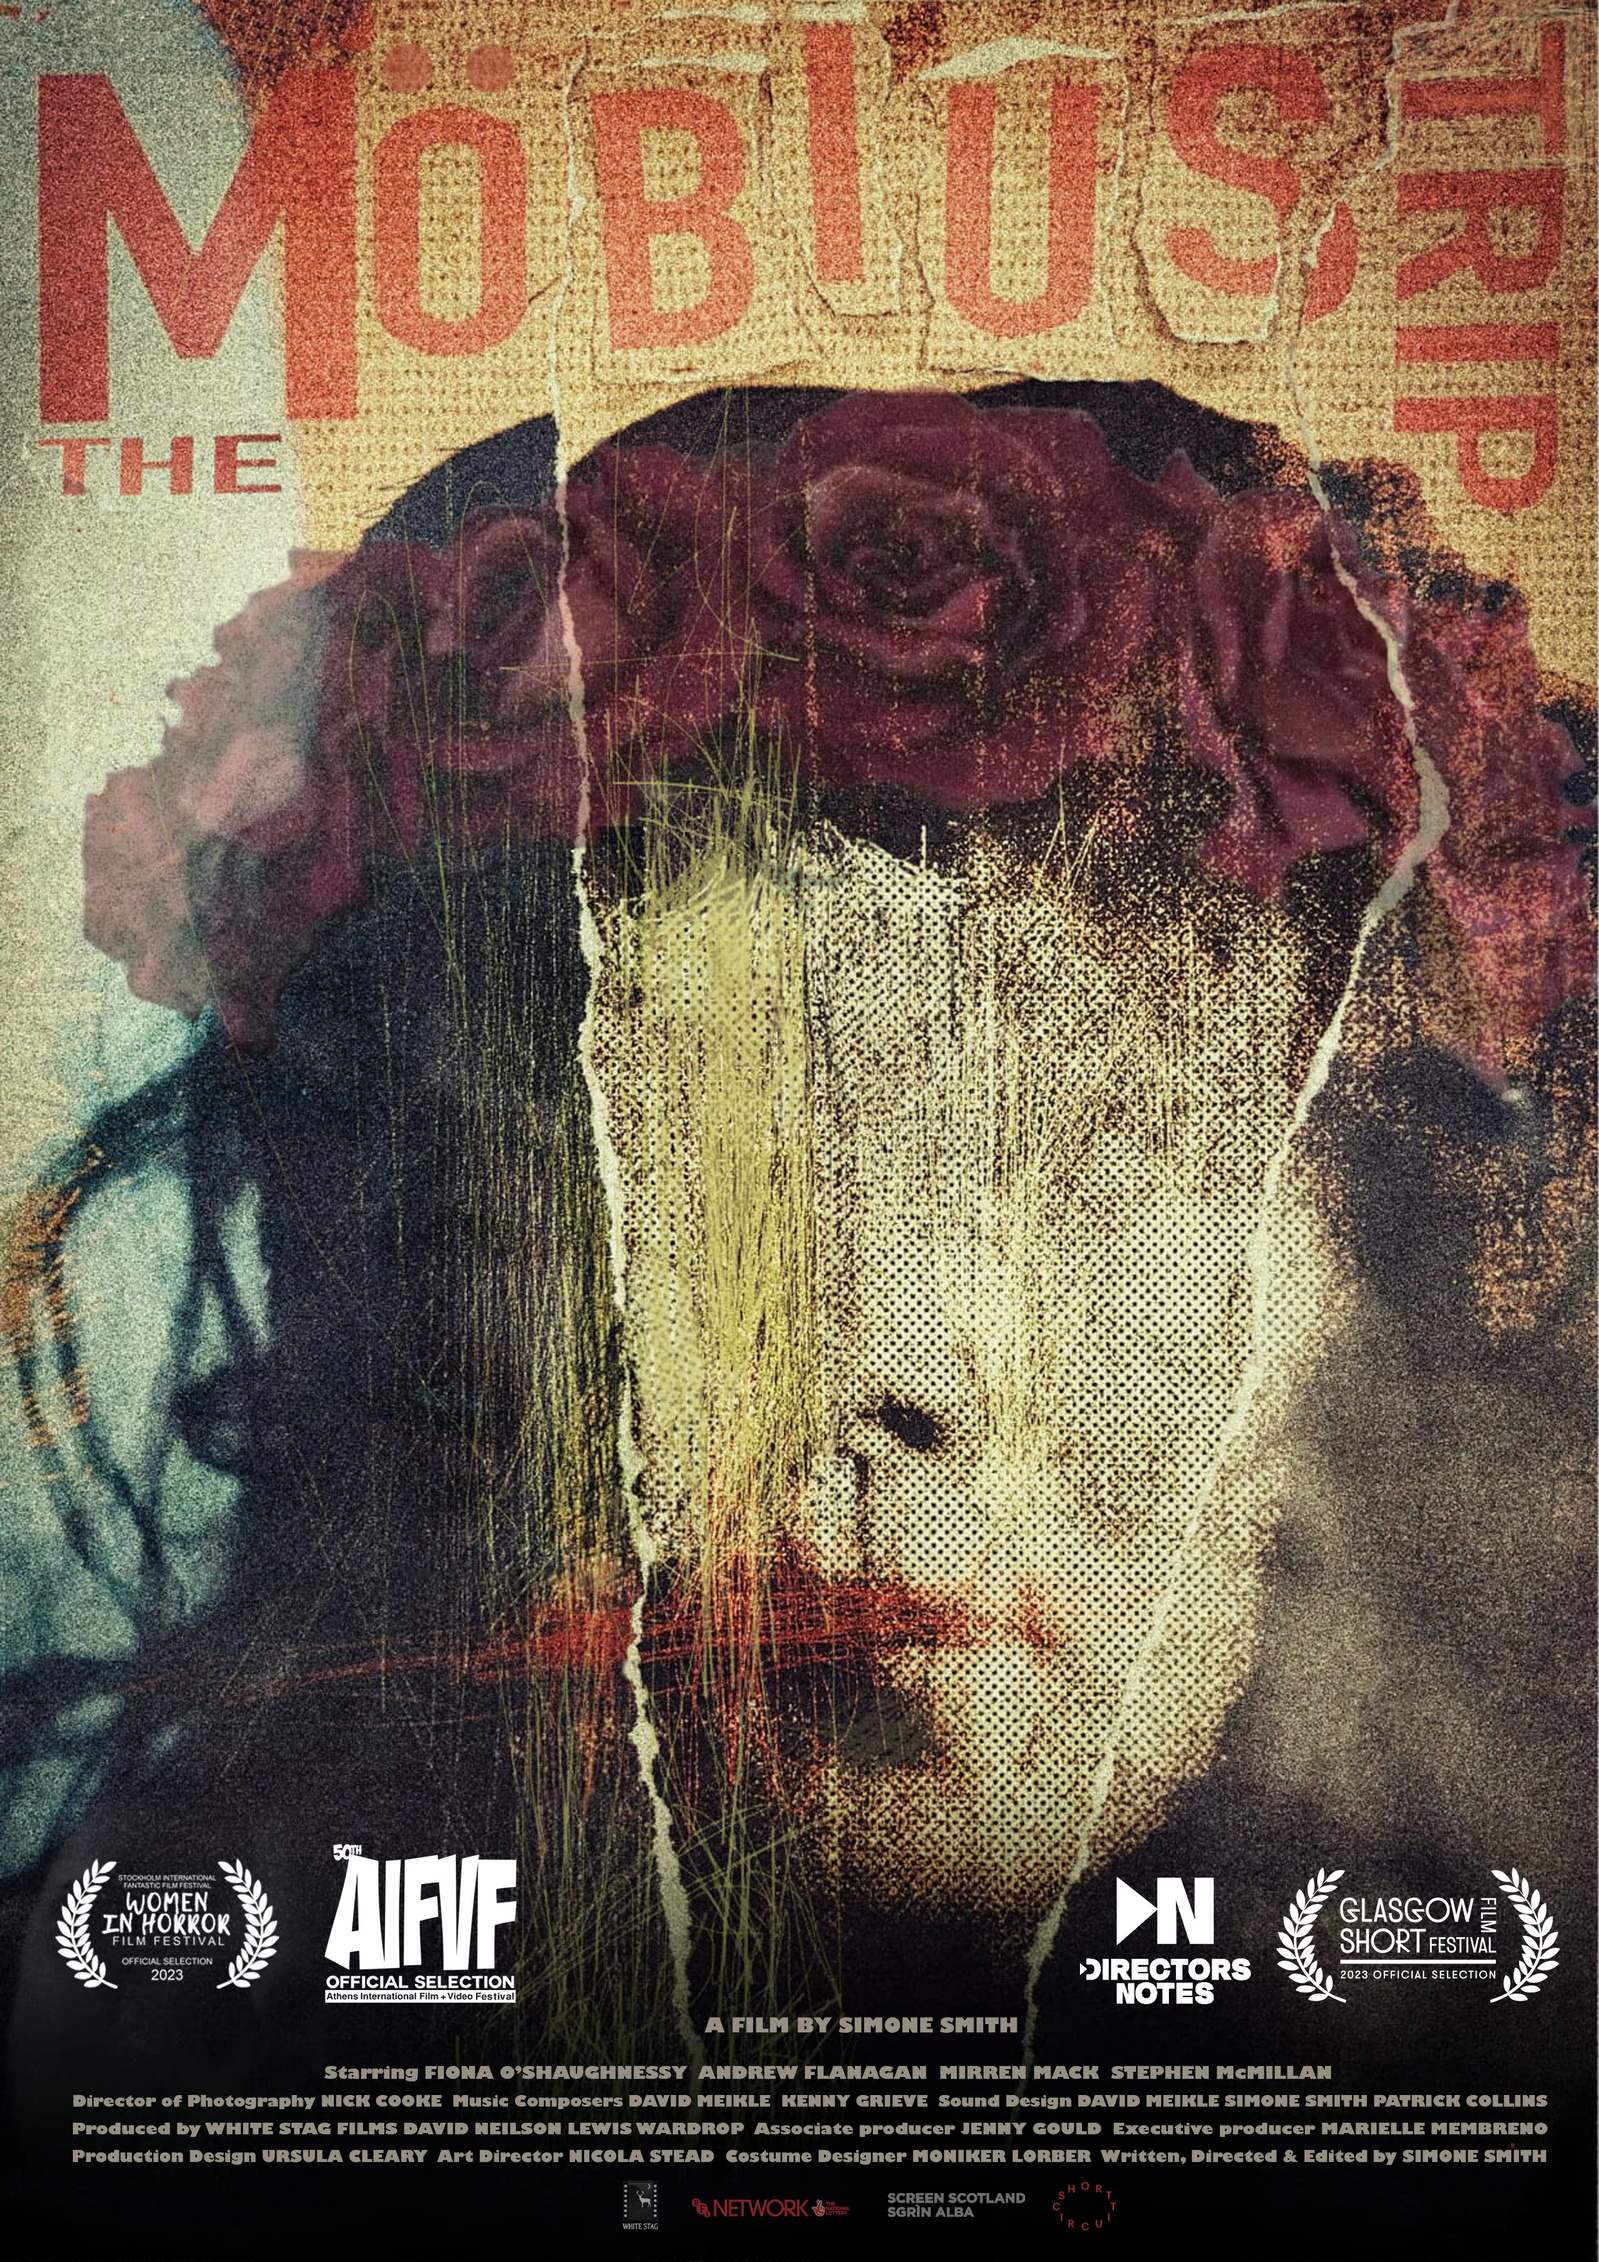 A woman's obscured face - film poster for THE MOBIUS TRIP